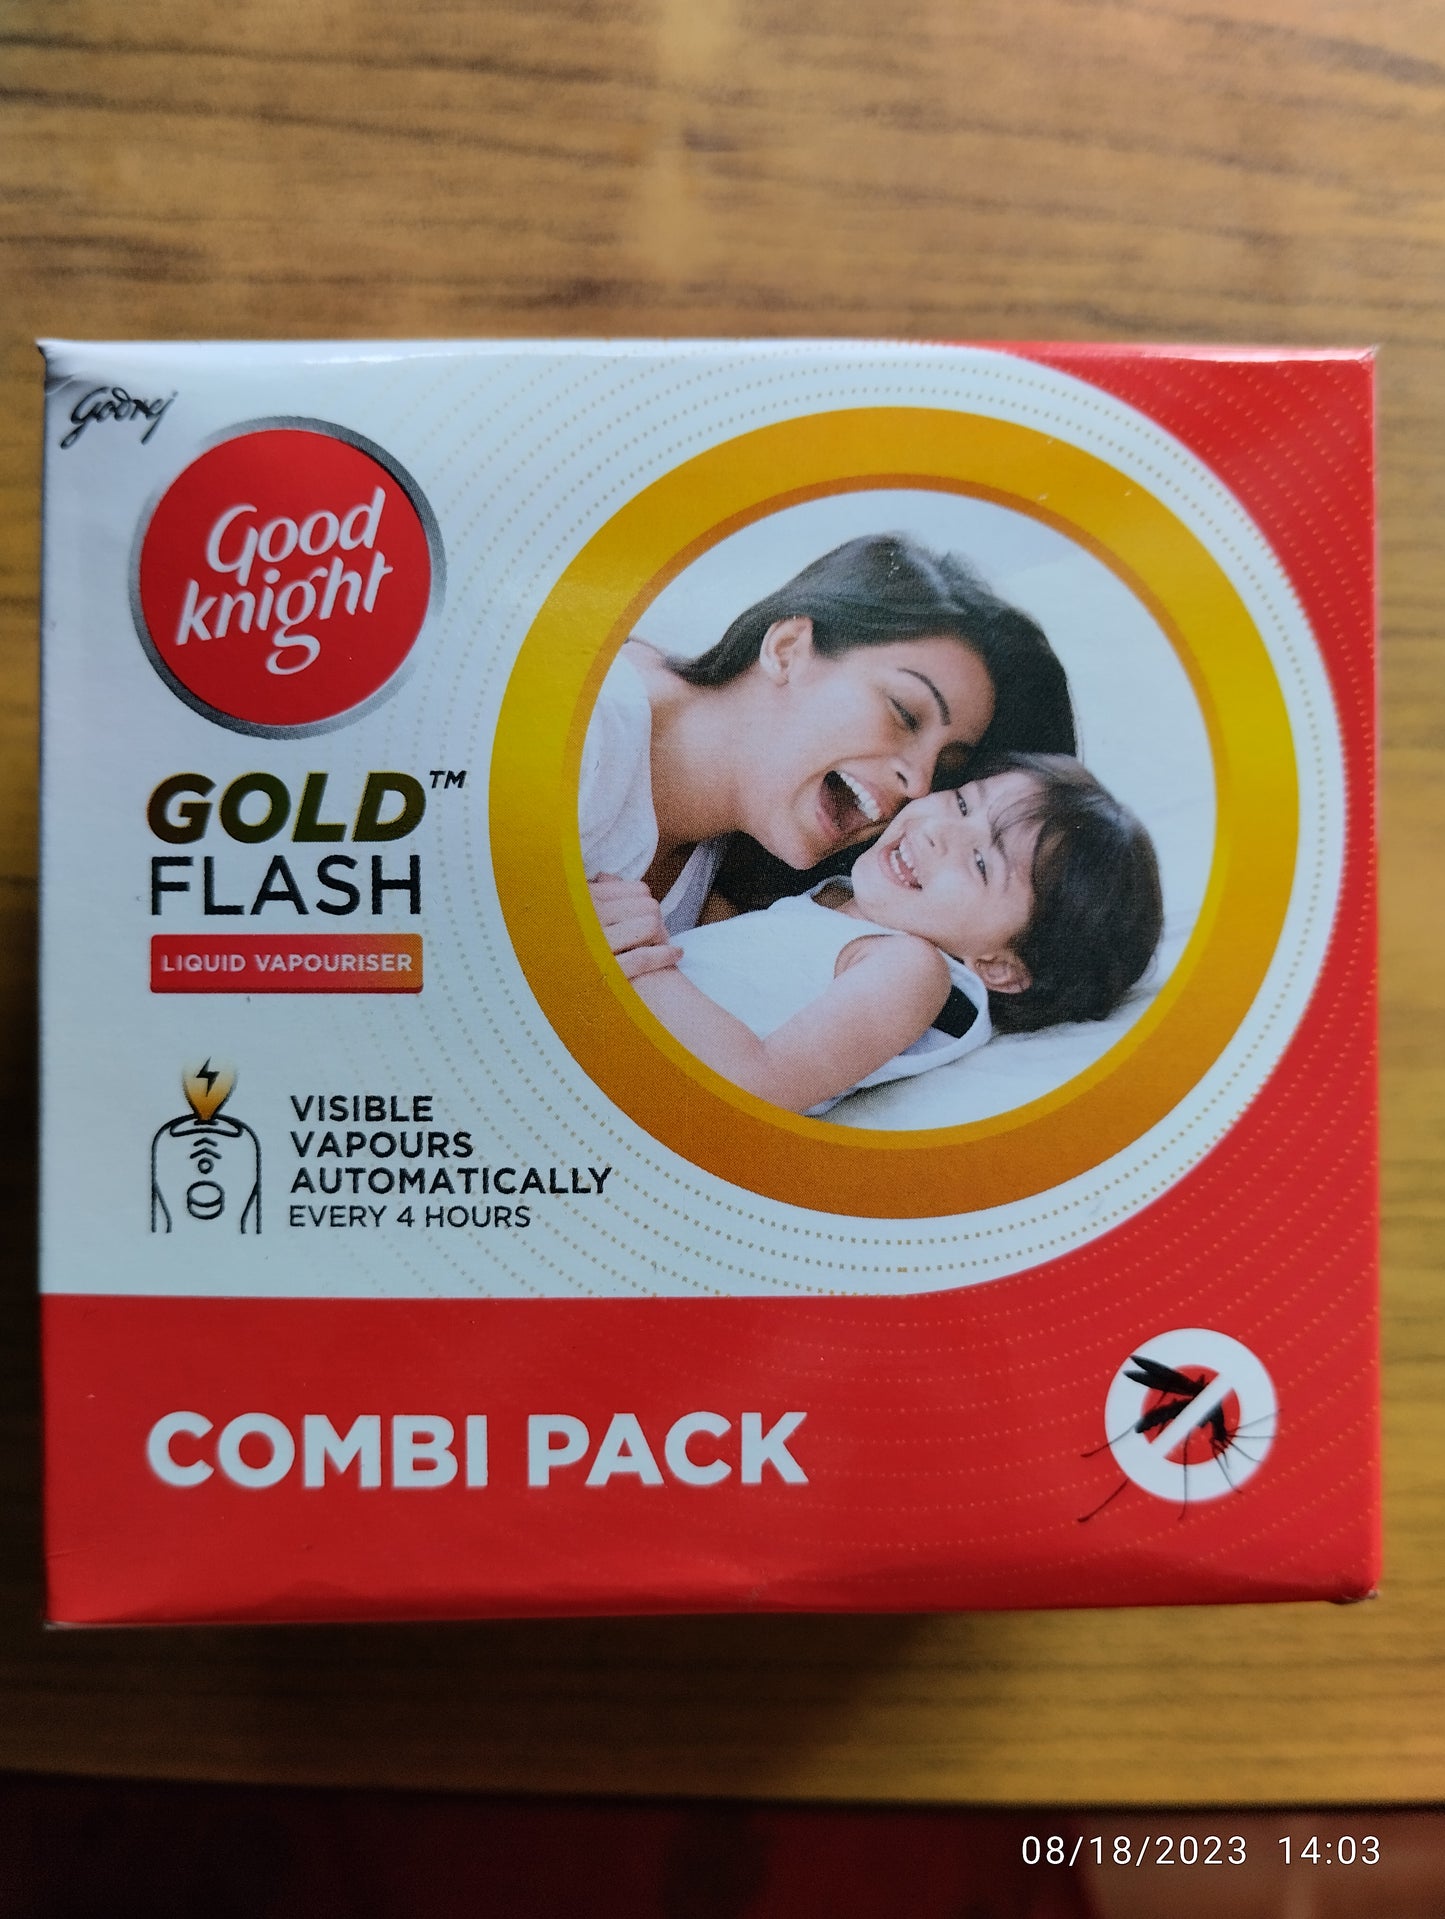 Good Knight - Gold flash COMBI PACK